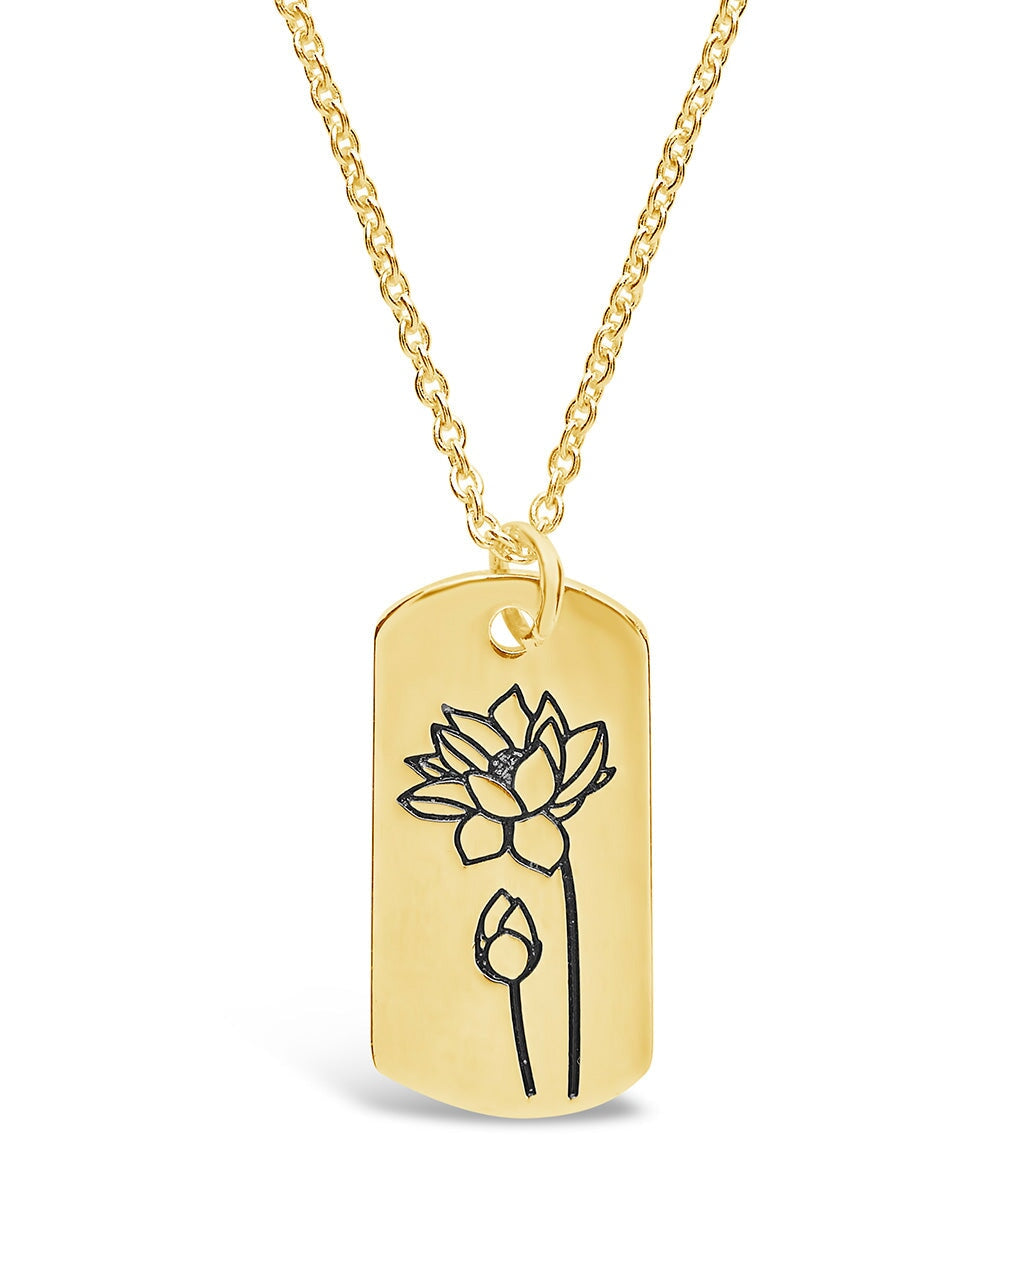 Birth Flower Pendant Necklace Sterling Forever Gold July / Water Lily 